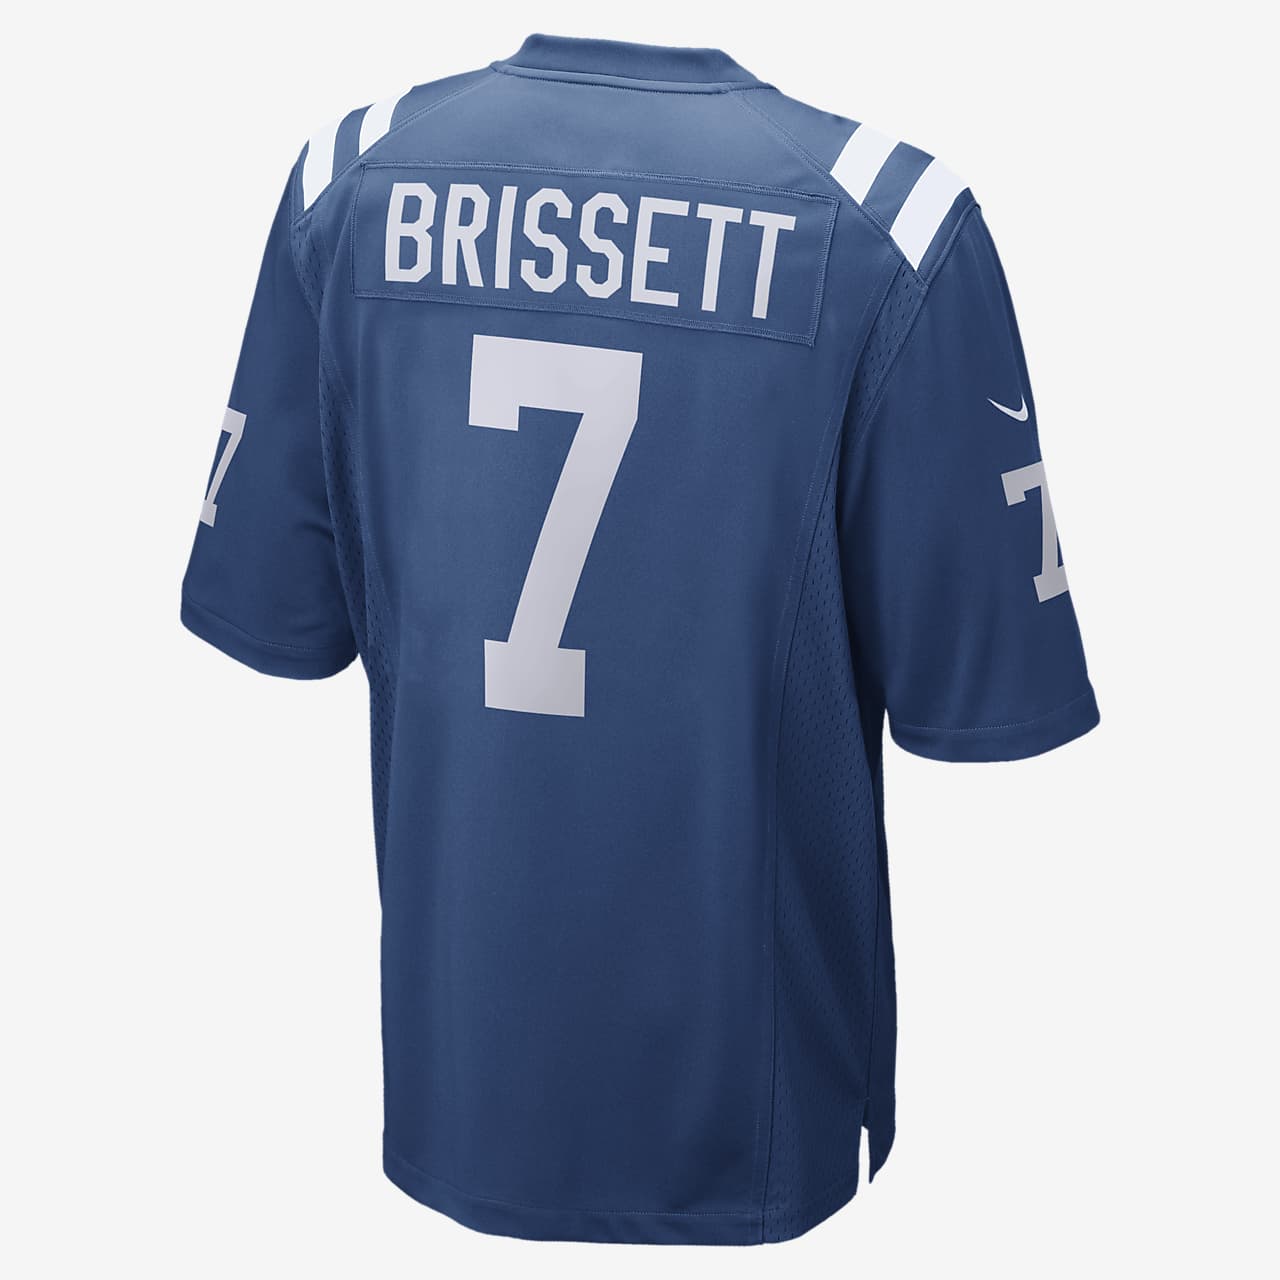 NFL Indianapolis Colts (Jacoby Brissett) Men's Game Football Jersey